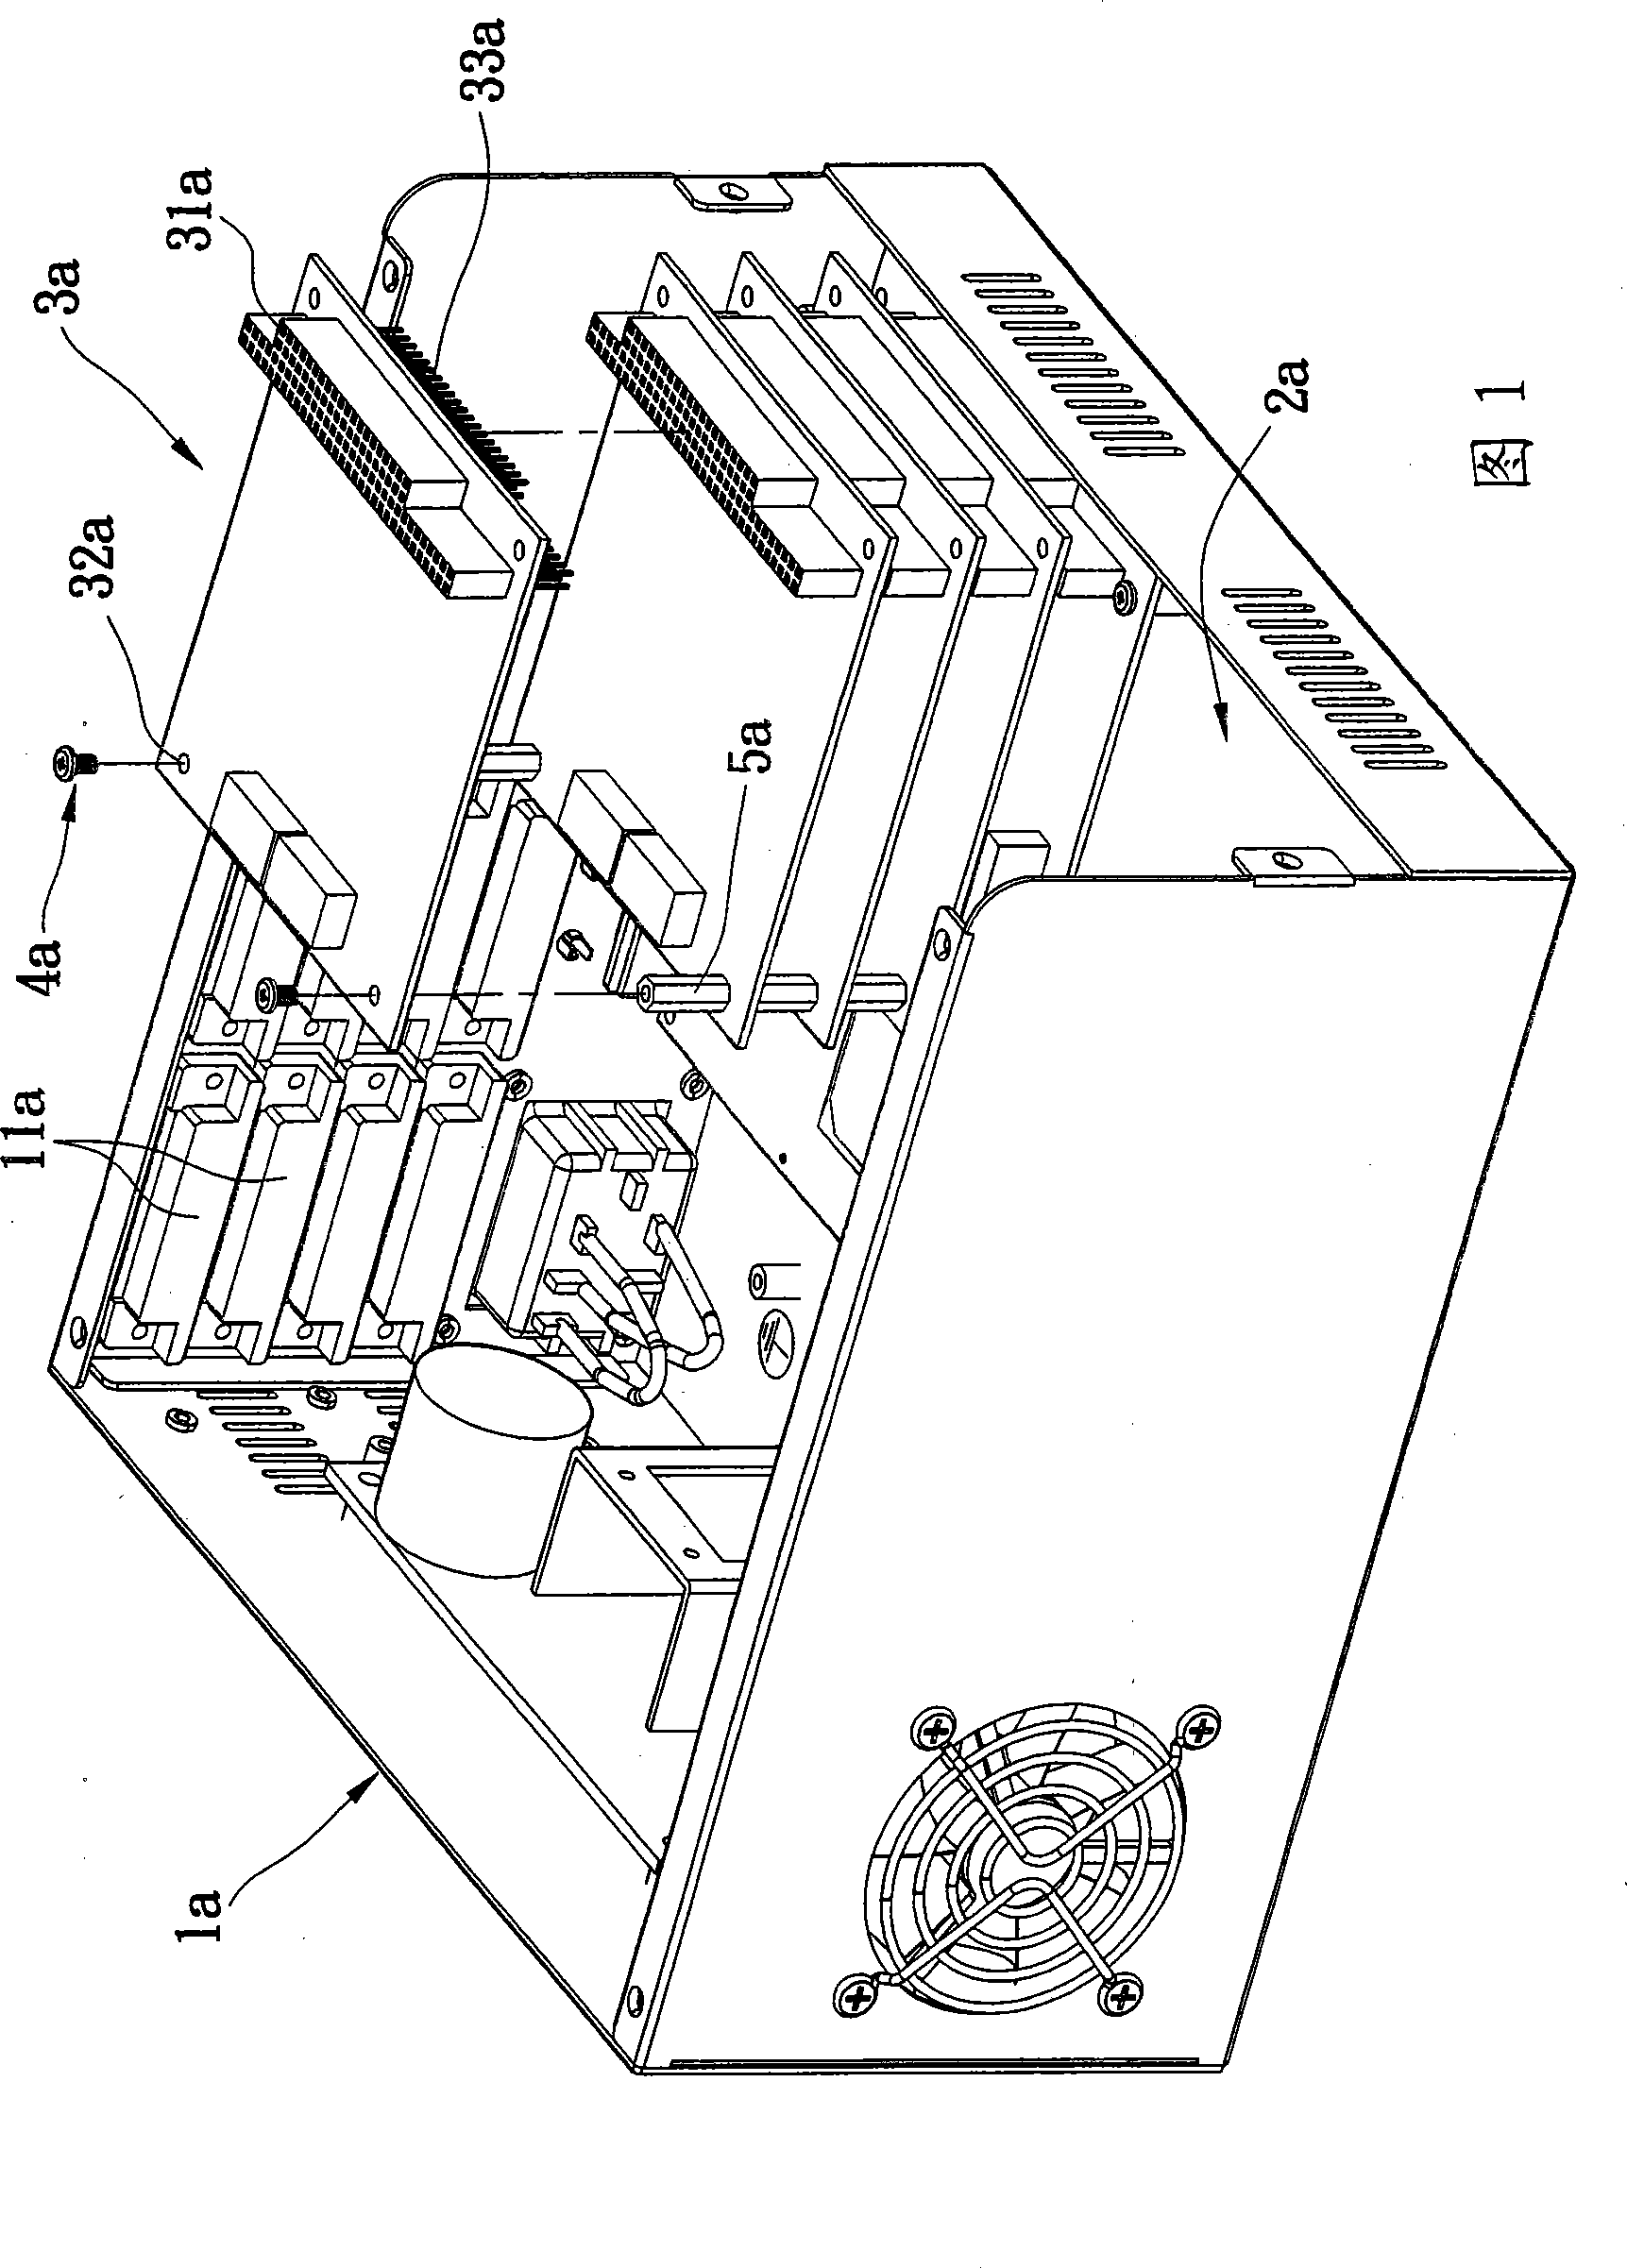 Extension module and its system